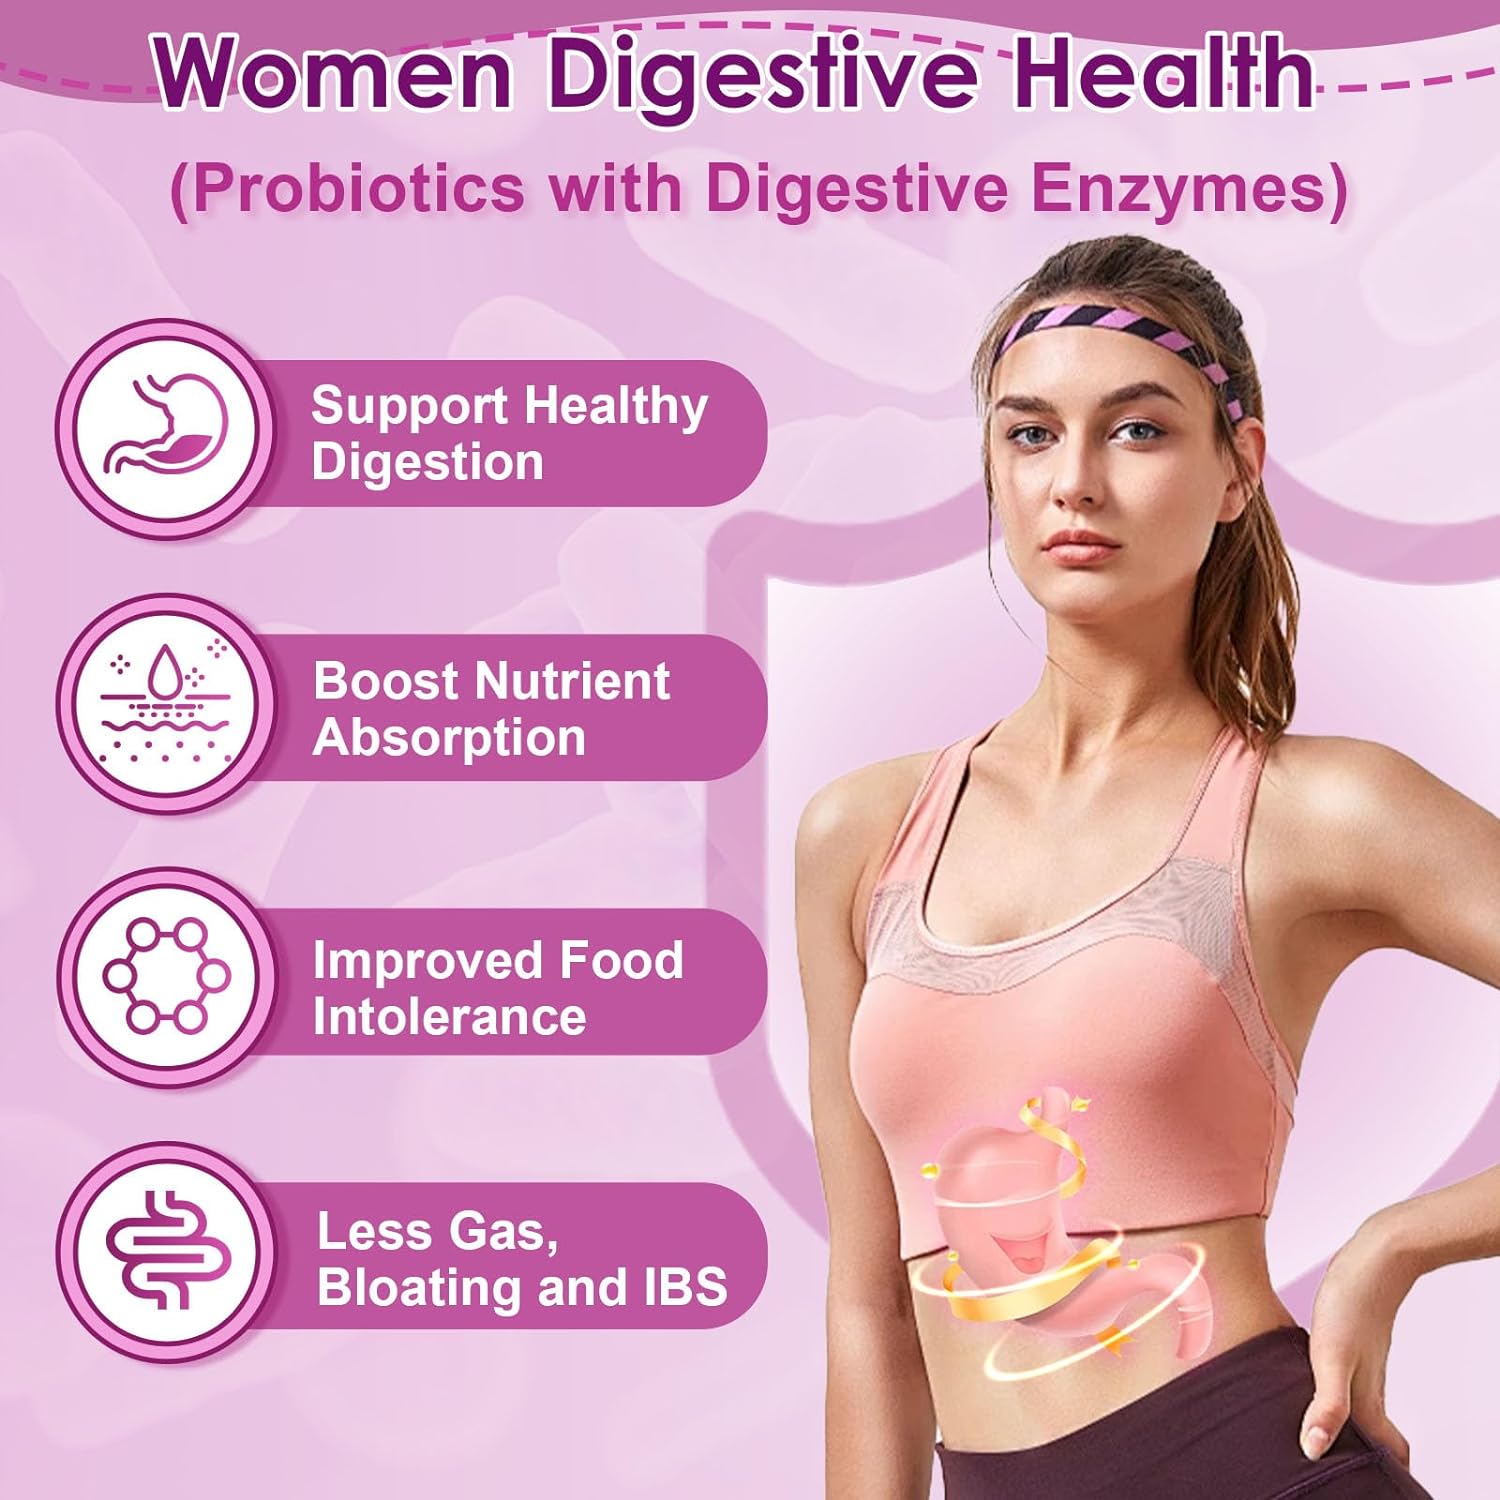 Women Digestive Health (Probiotics with Digestive Enzymes)